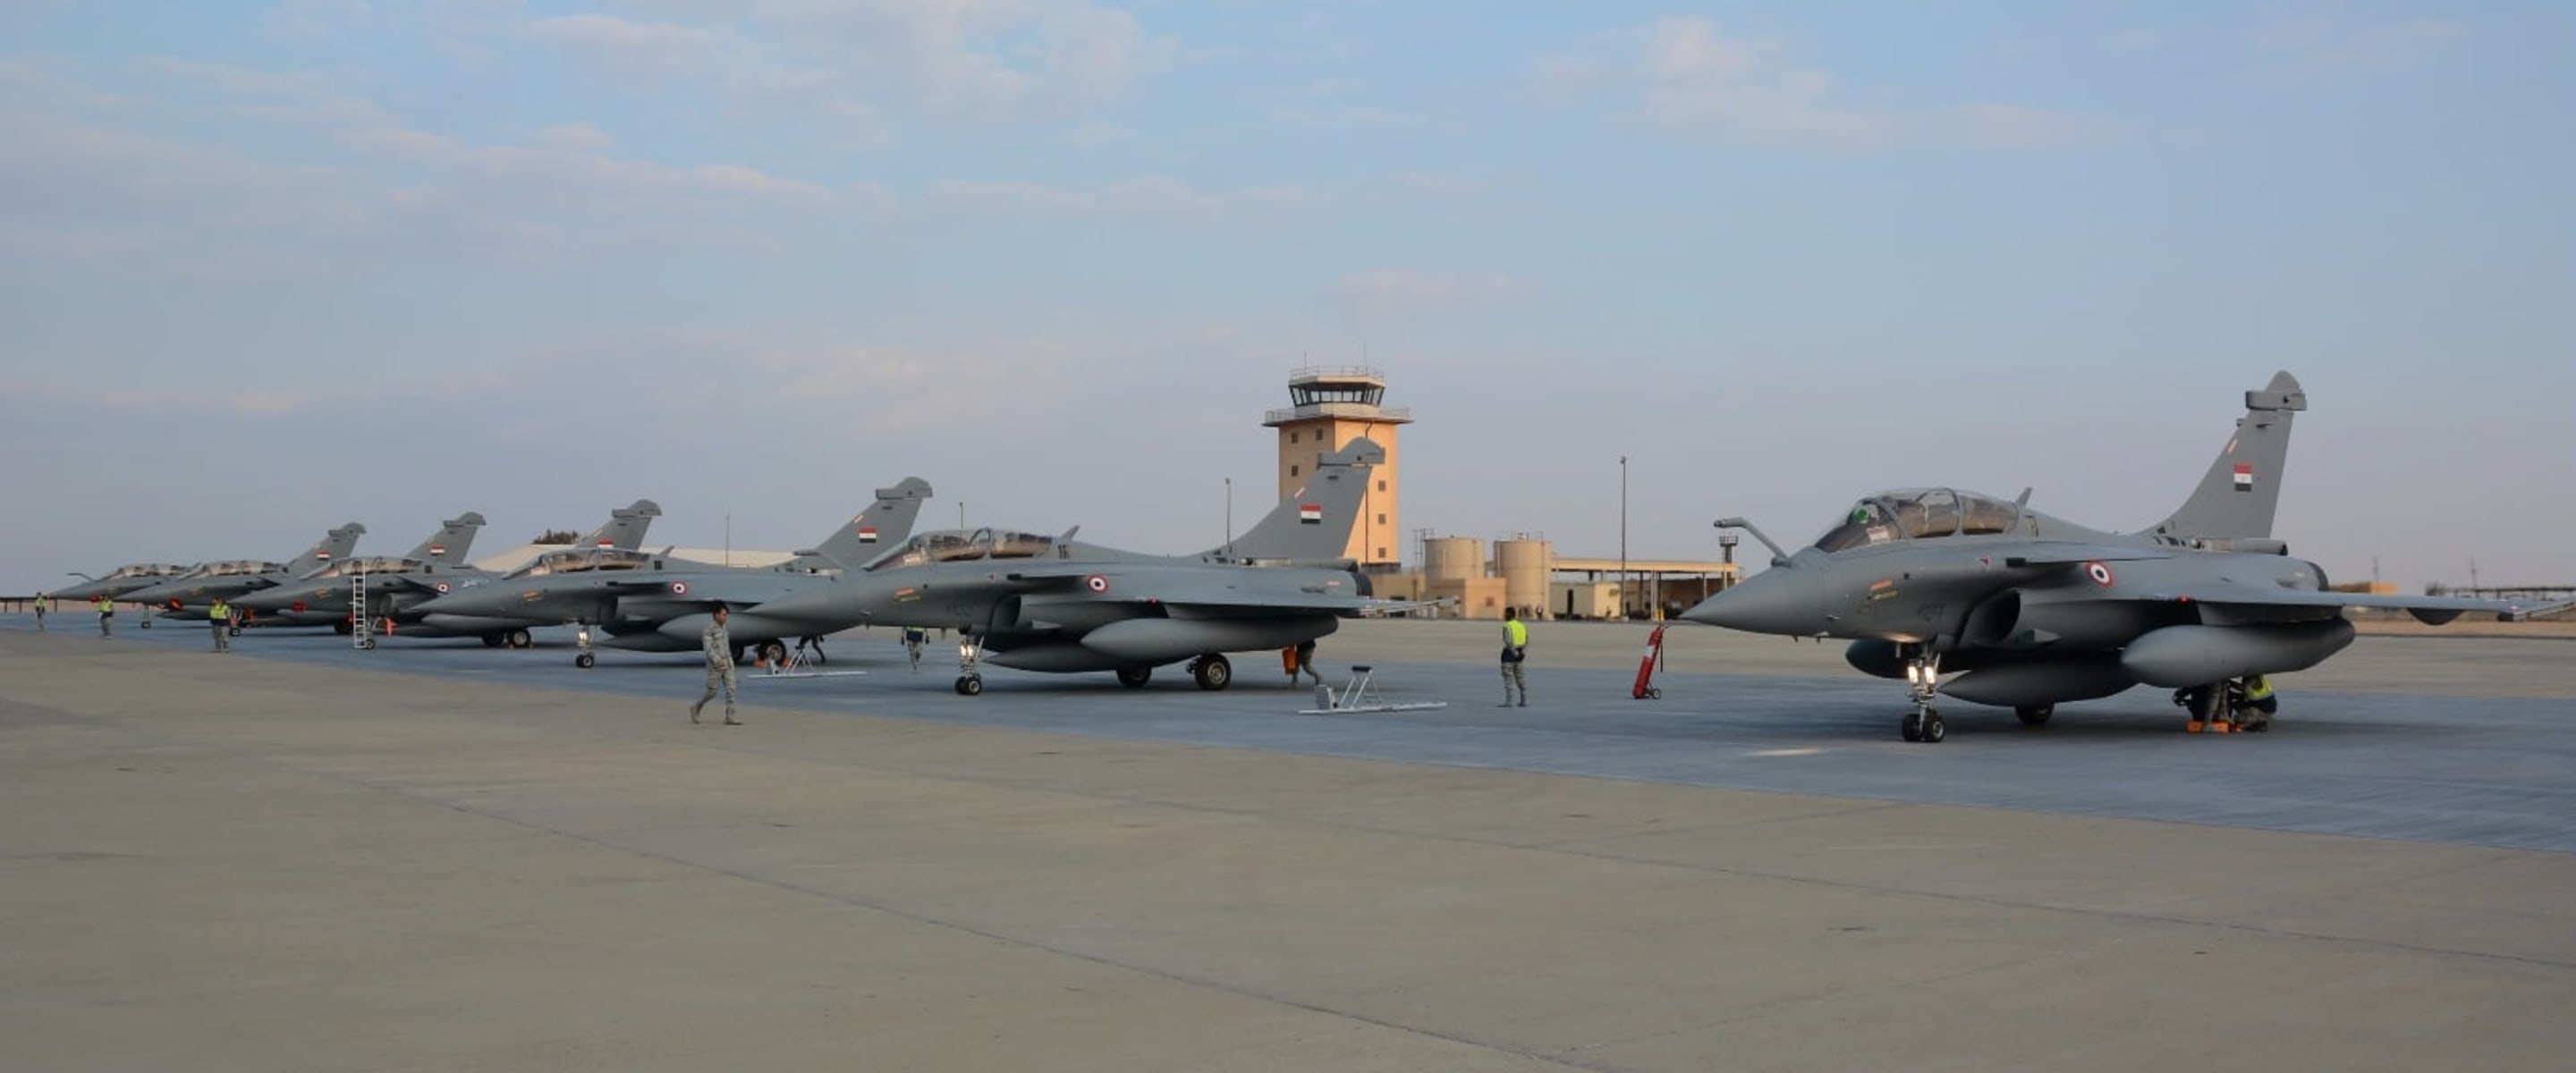 Second delivery of Rafale Egypt. Arrival in Egypt on January 28th, 2016.